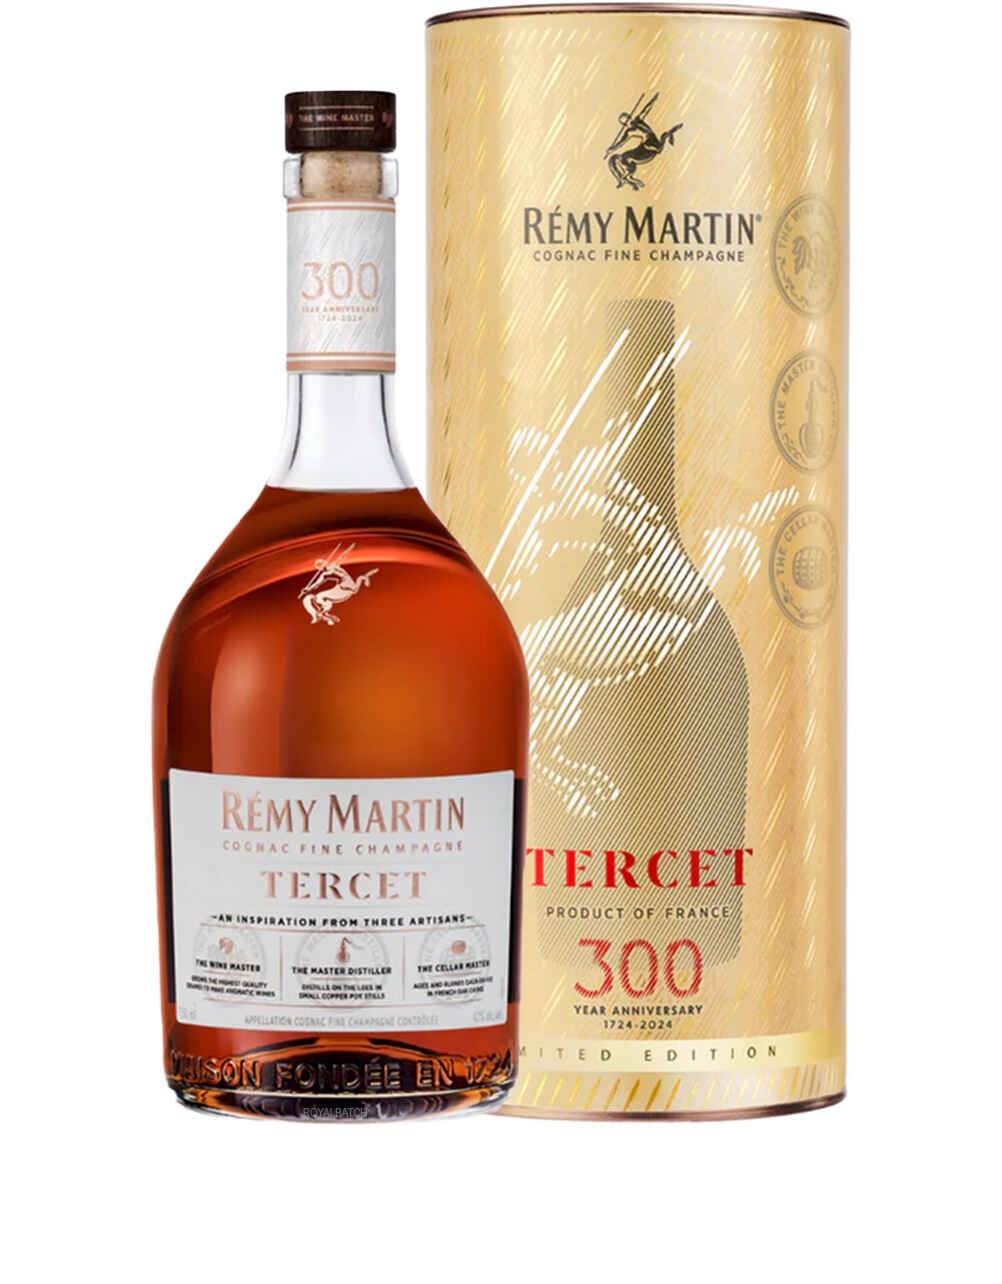 Remy Martin Tercet Limited Edition 300 Year Anniversary Cognac